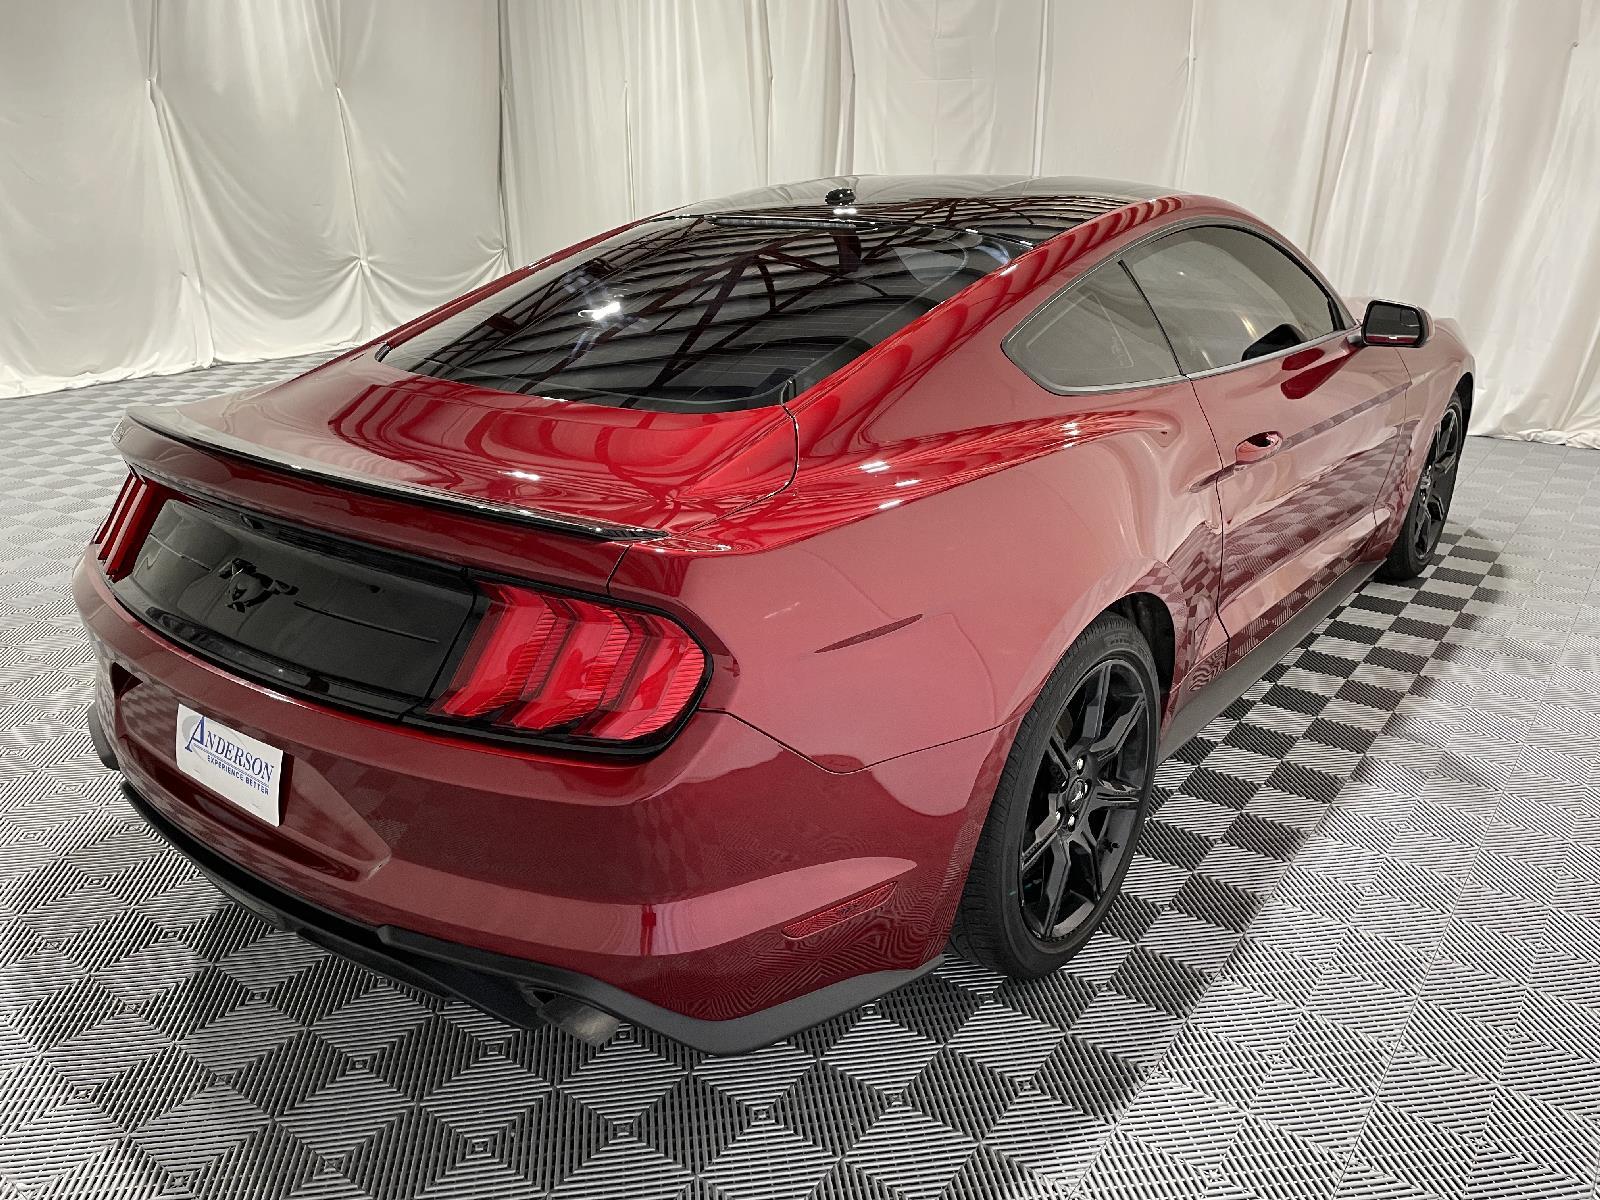 Used 2019 Ford Mustang EcoBoost Coupe for sale in St Joseph MO